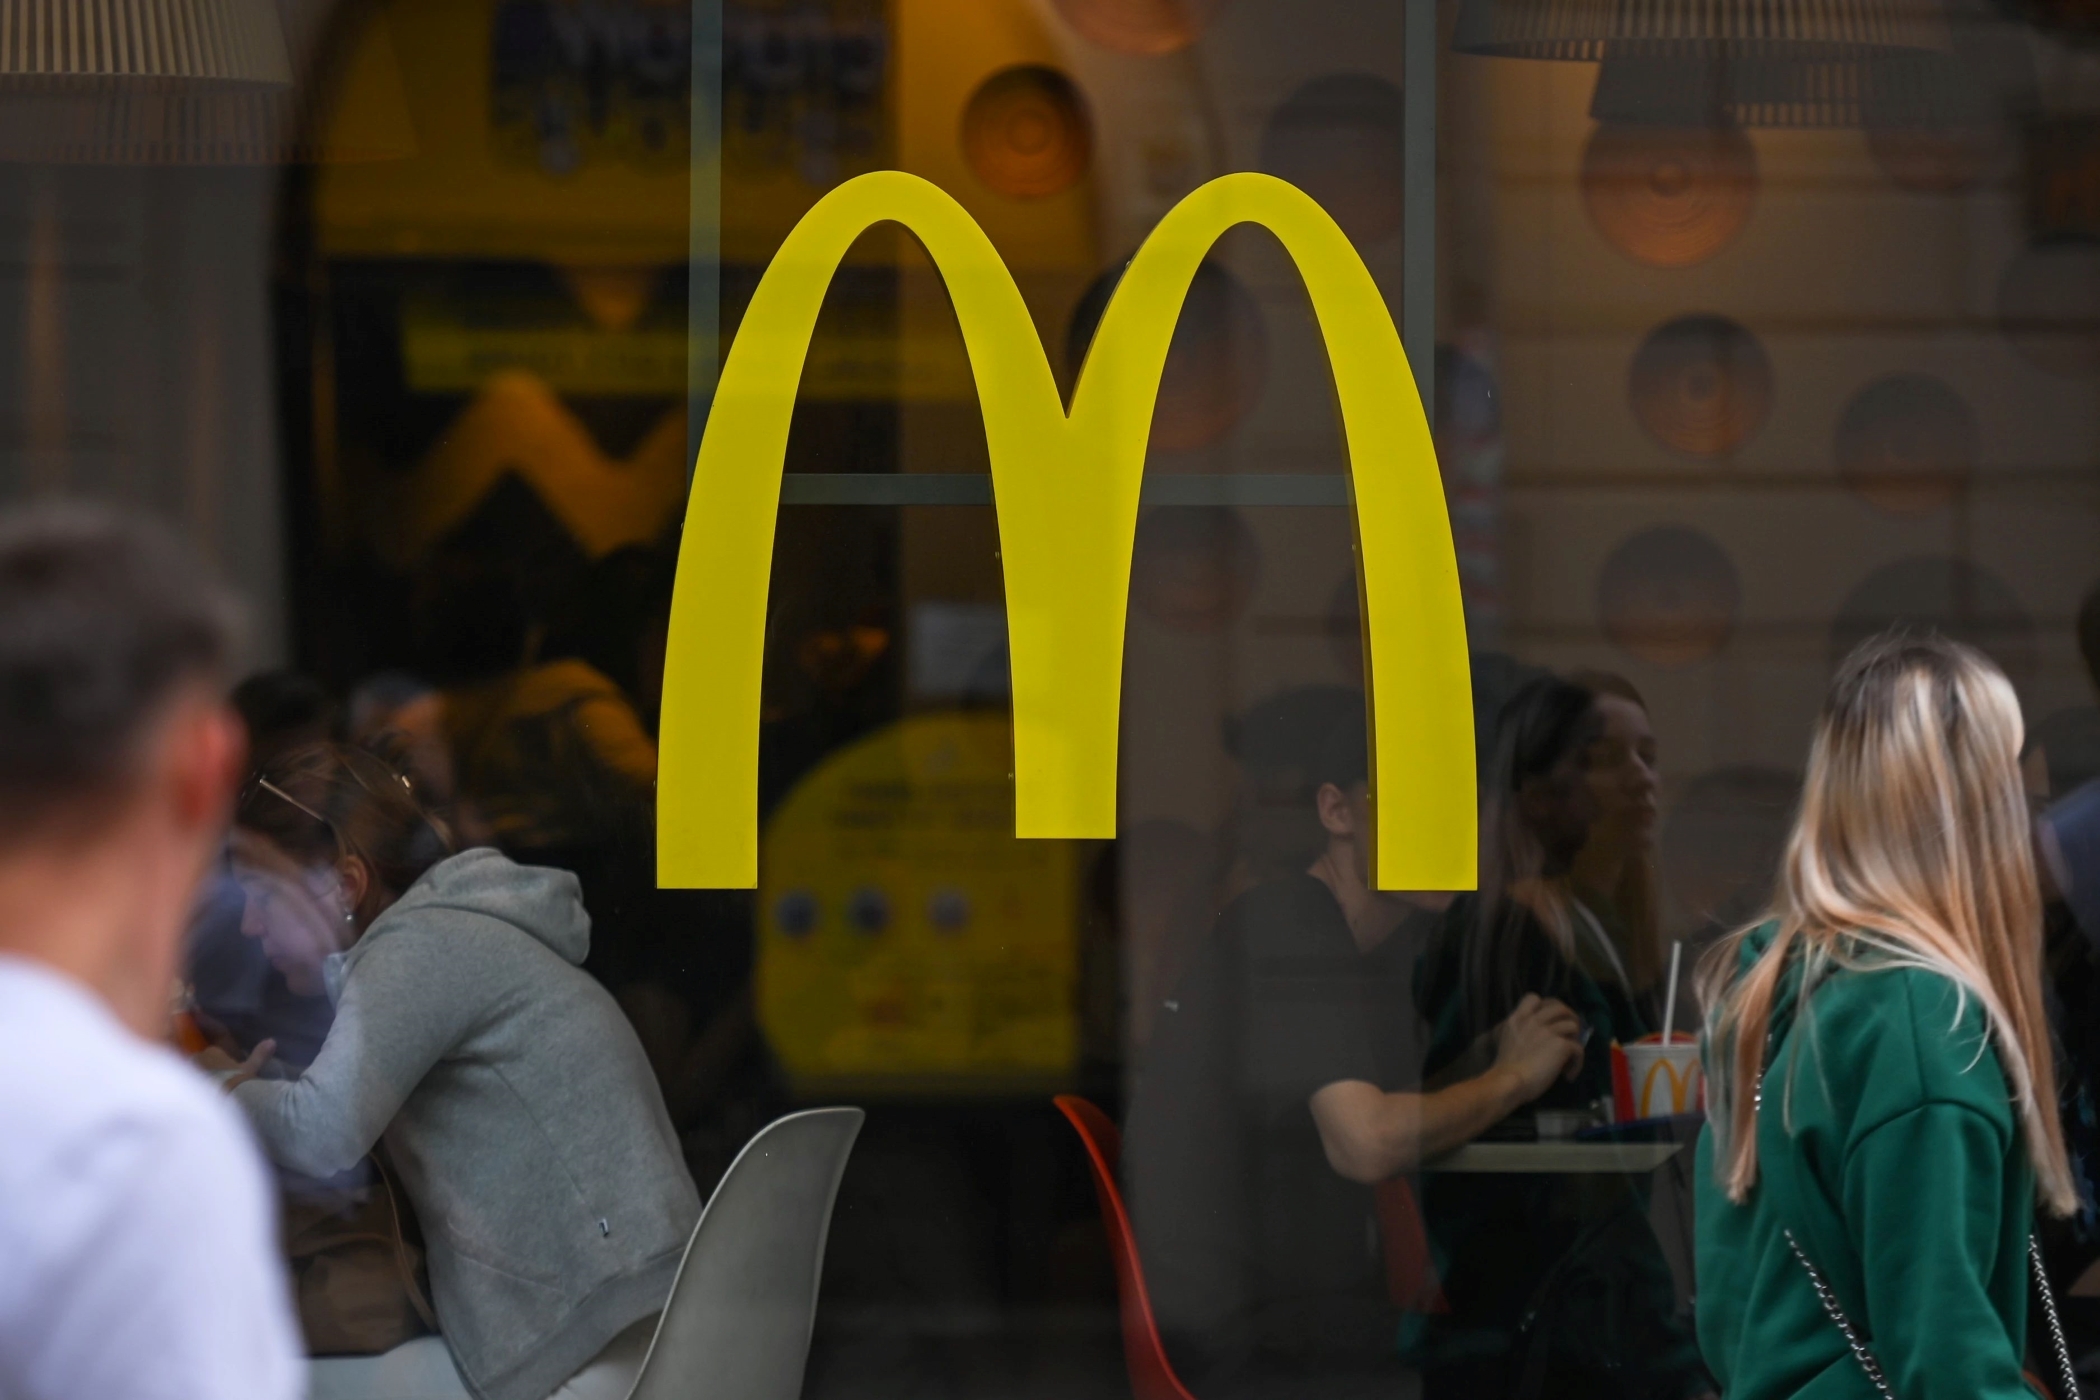 McDonald's saw first-quarter sales rise as it paced ahead of category rivals for repeat customer visits. (Getty Images)